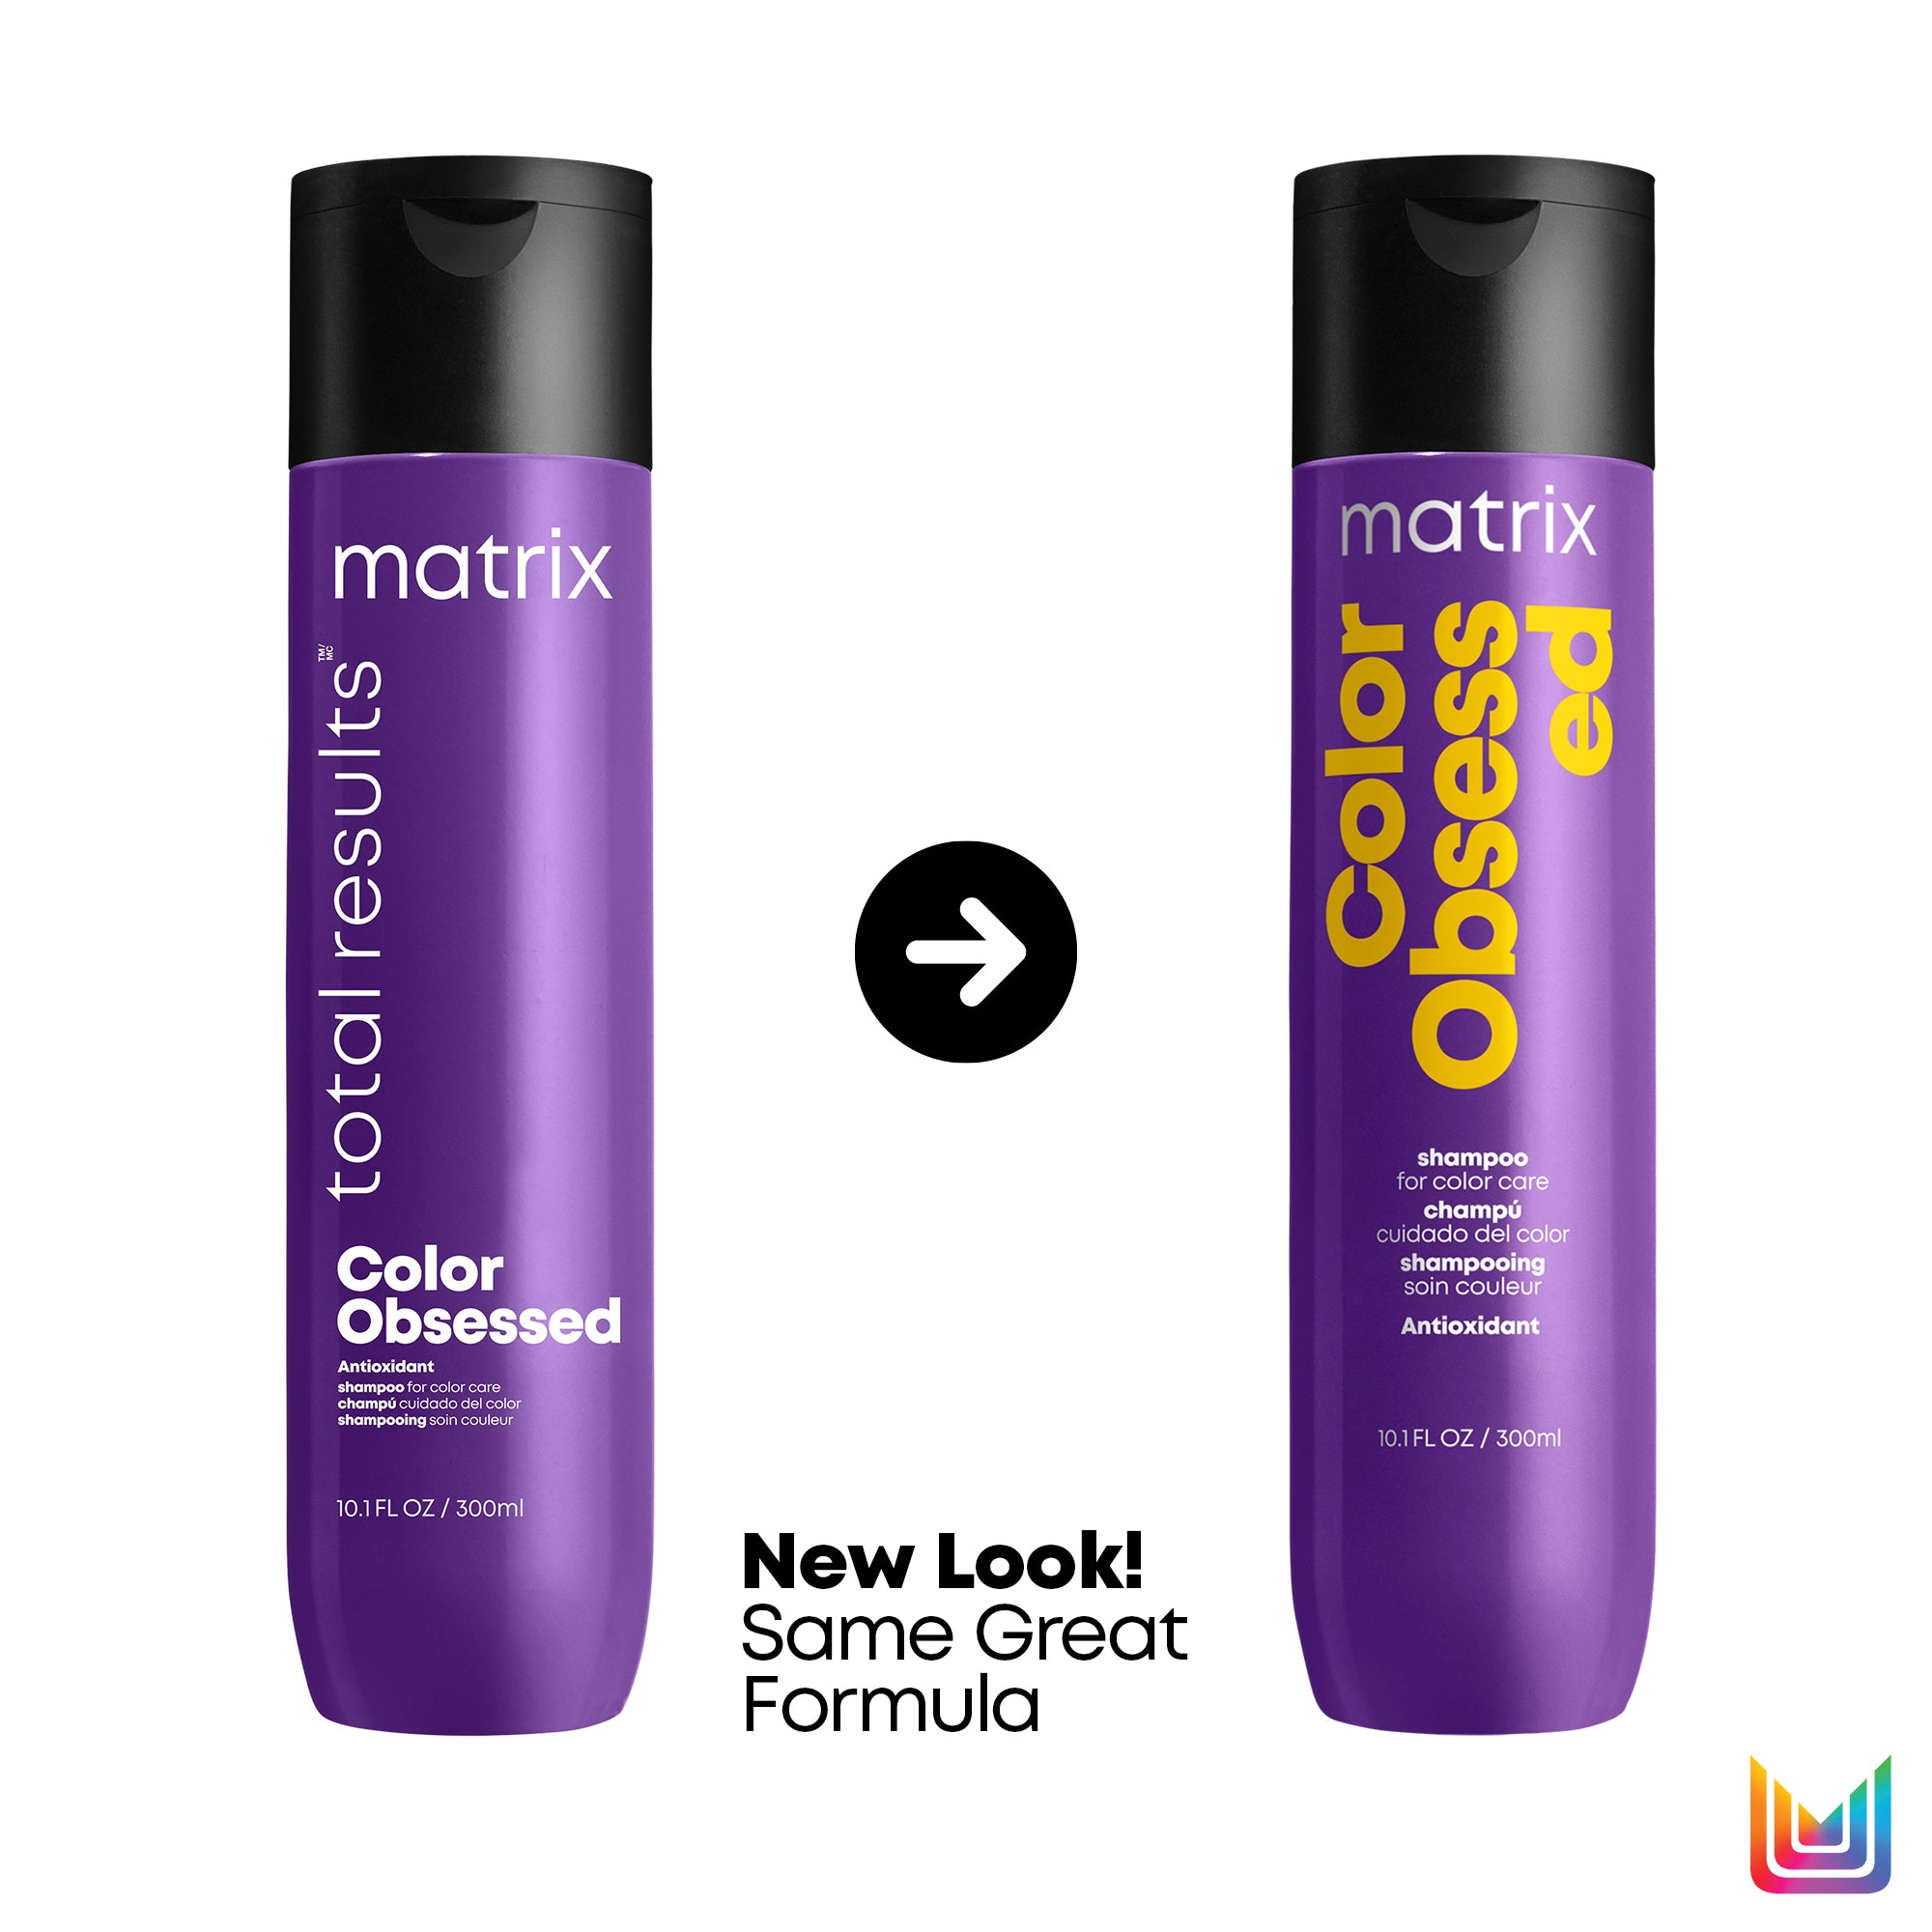 Matrix Color Obsessed Shampoo and Conditioner Duo 10oz ($36 Value)